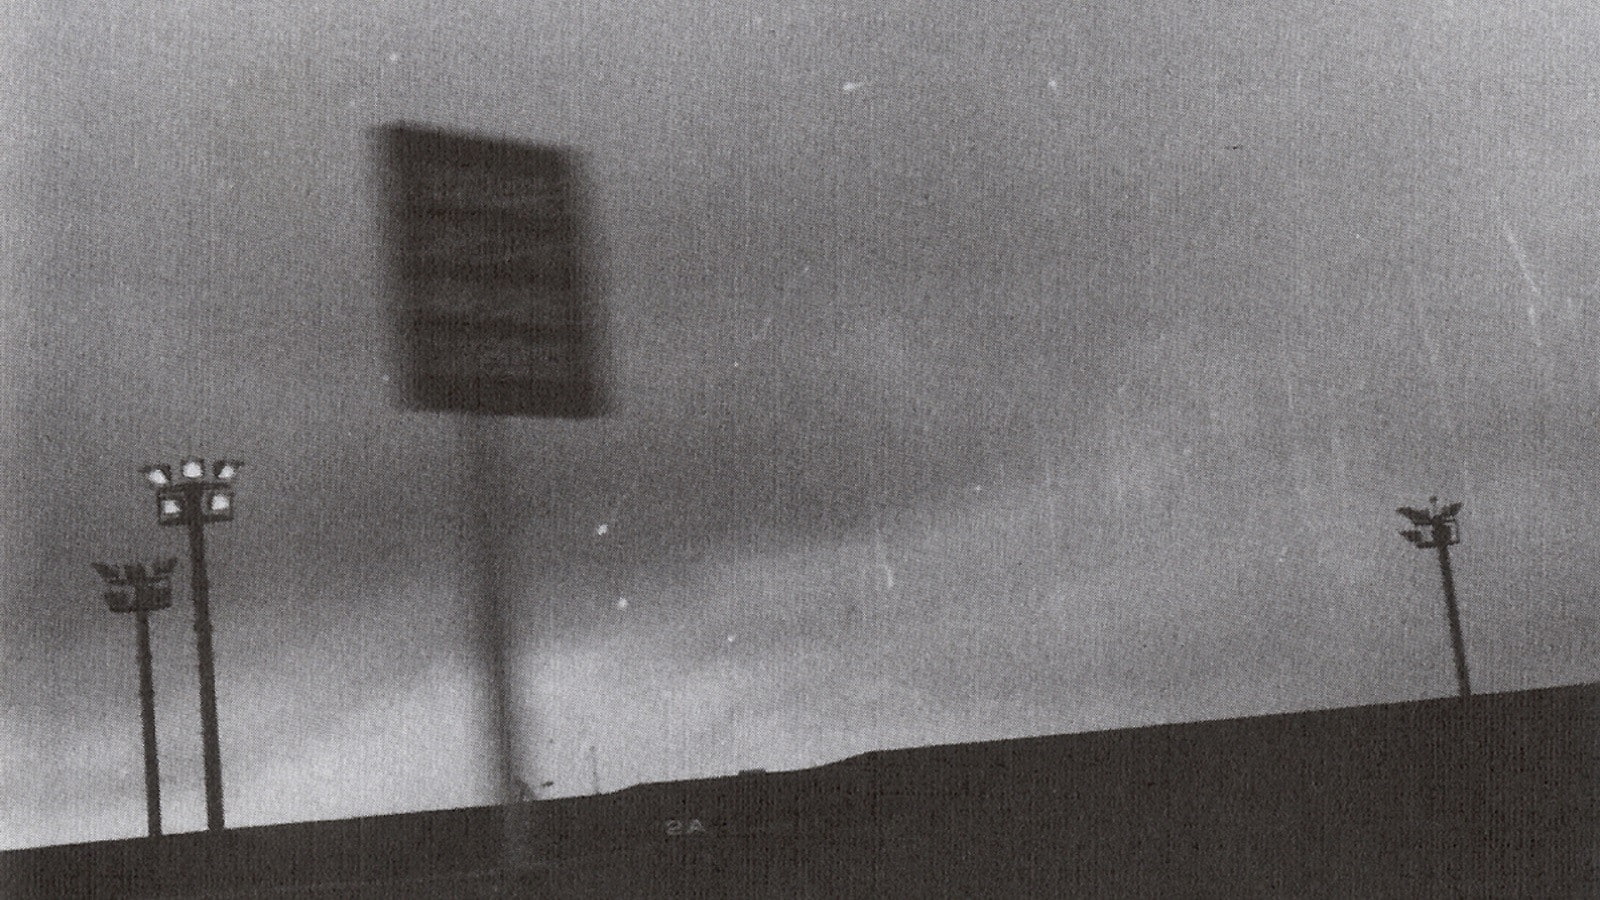 music, Godspeed You! Black Emperor, album covers, wall - building feature